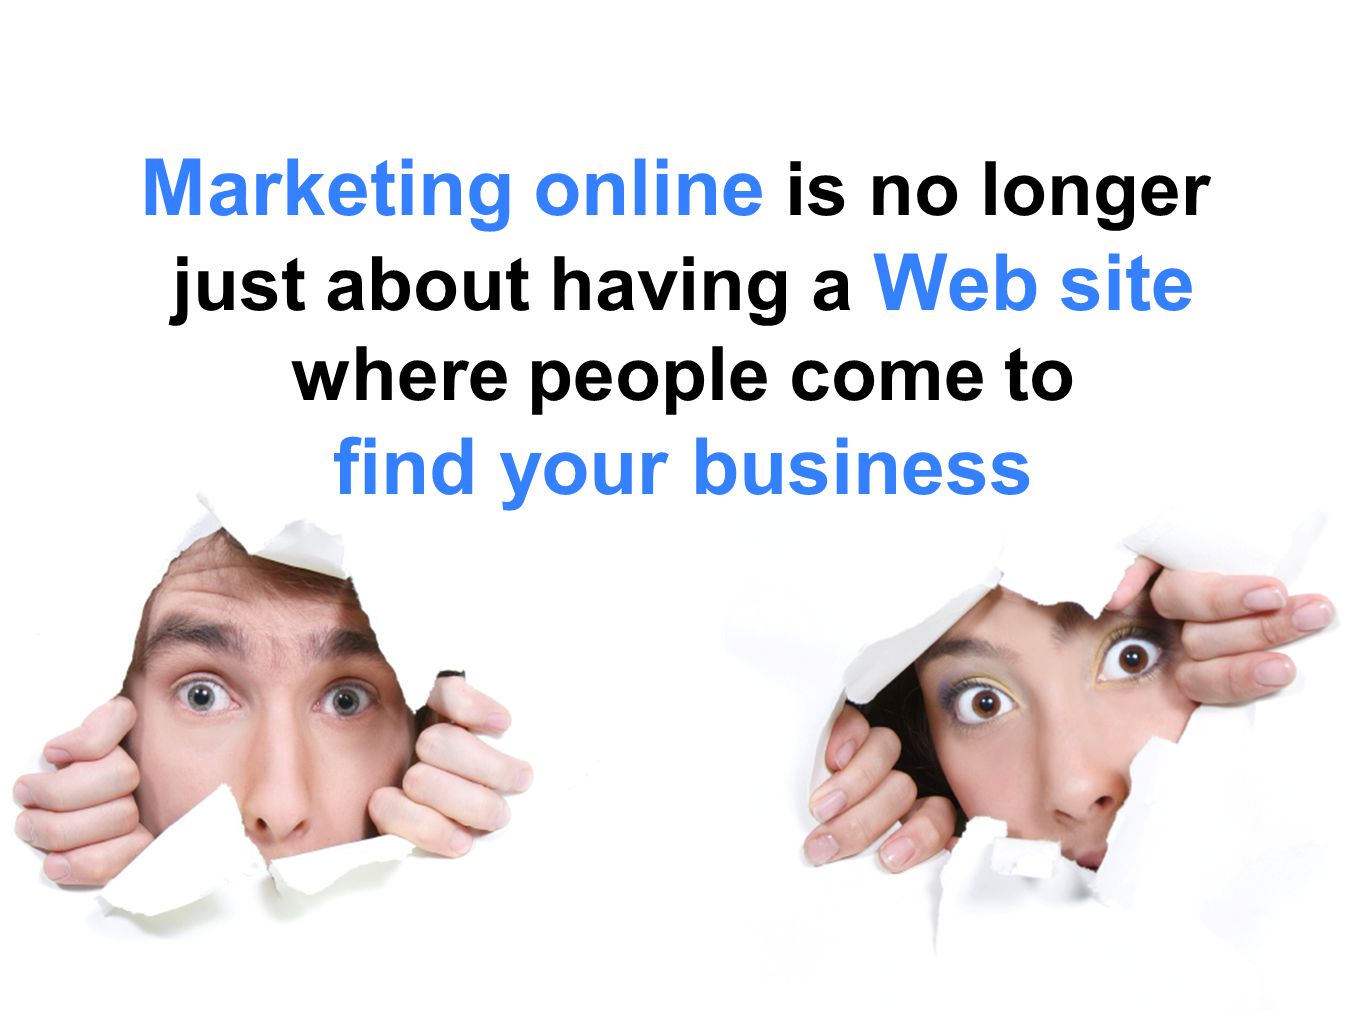 Marketing online is no longer just about having a Web site where people come to find your business